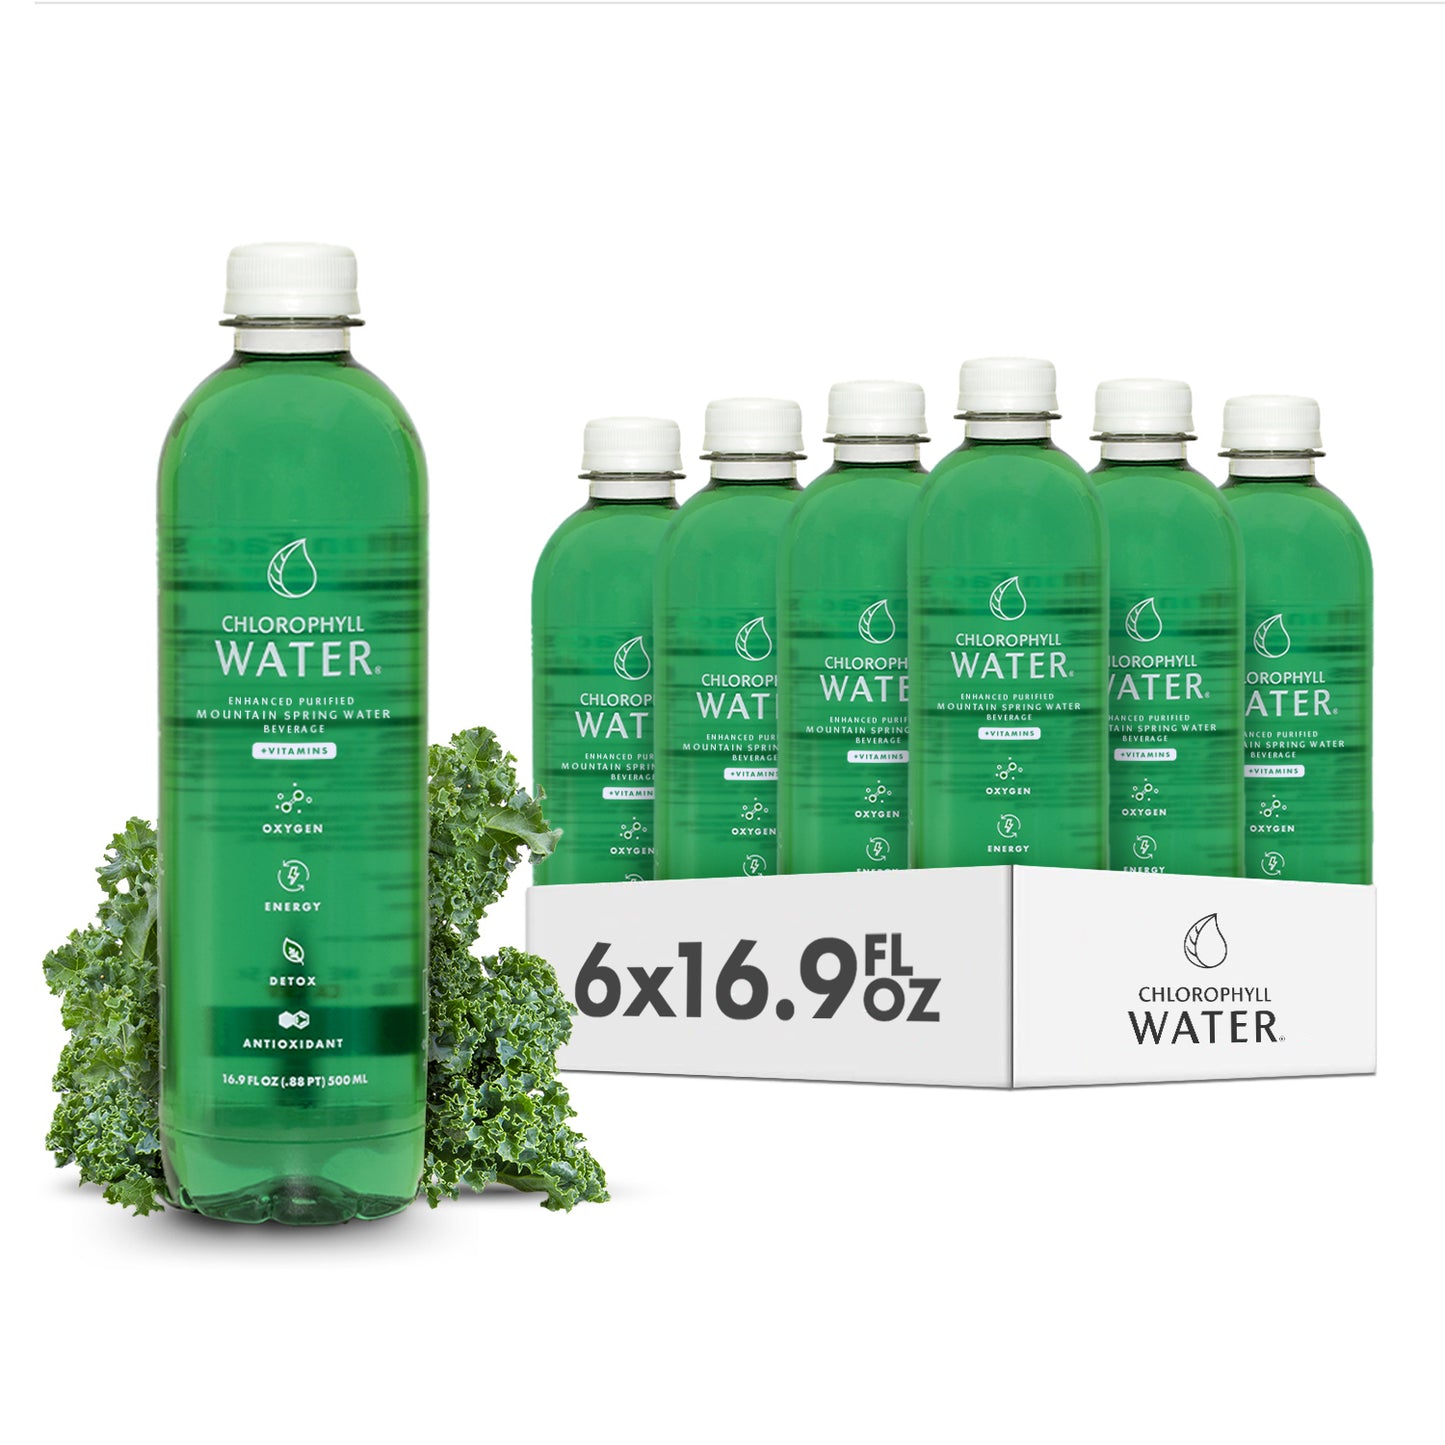 Case of Chlorophyll Water® | Purified Mountain Spring Water with Essential Vitamins